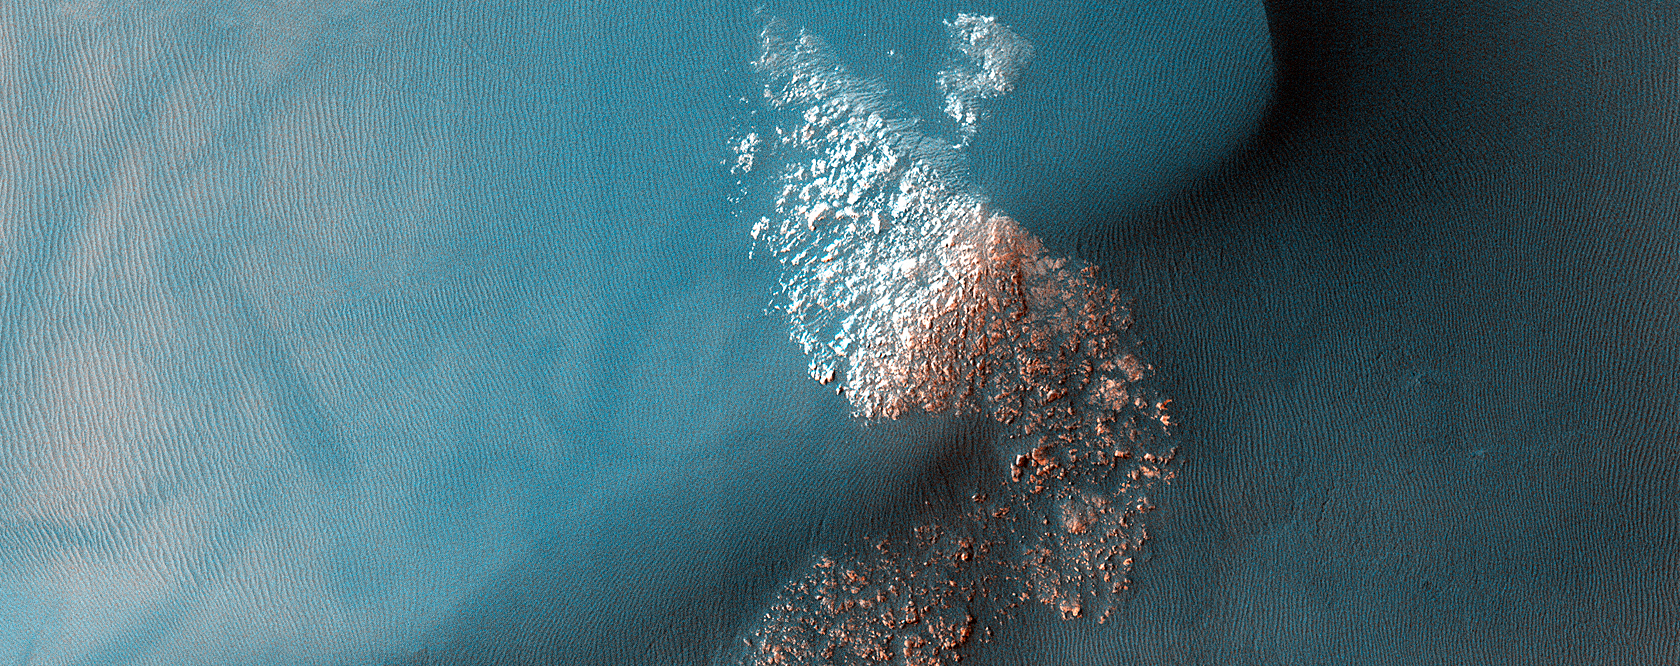 Southern Hemisphere Crater with a Dune Field